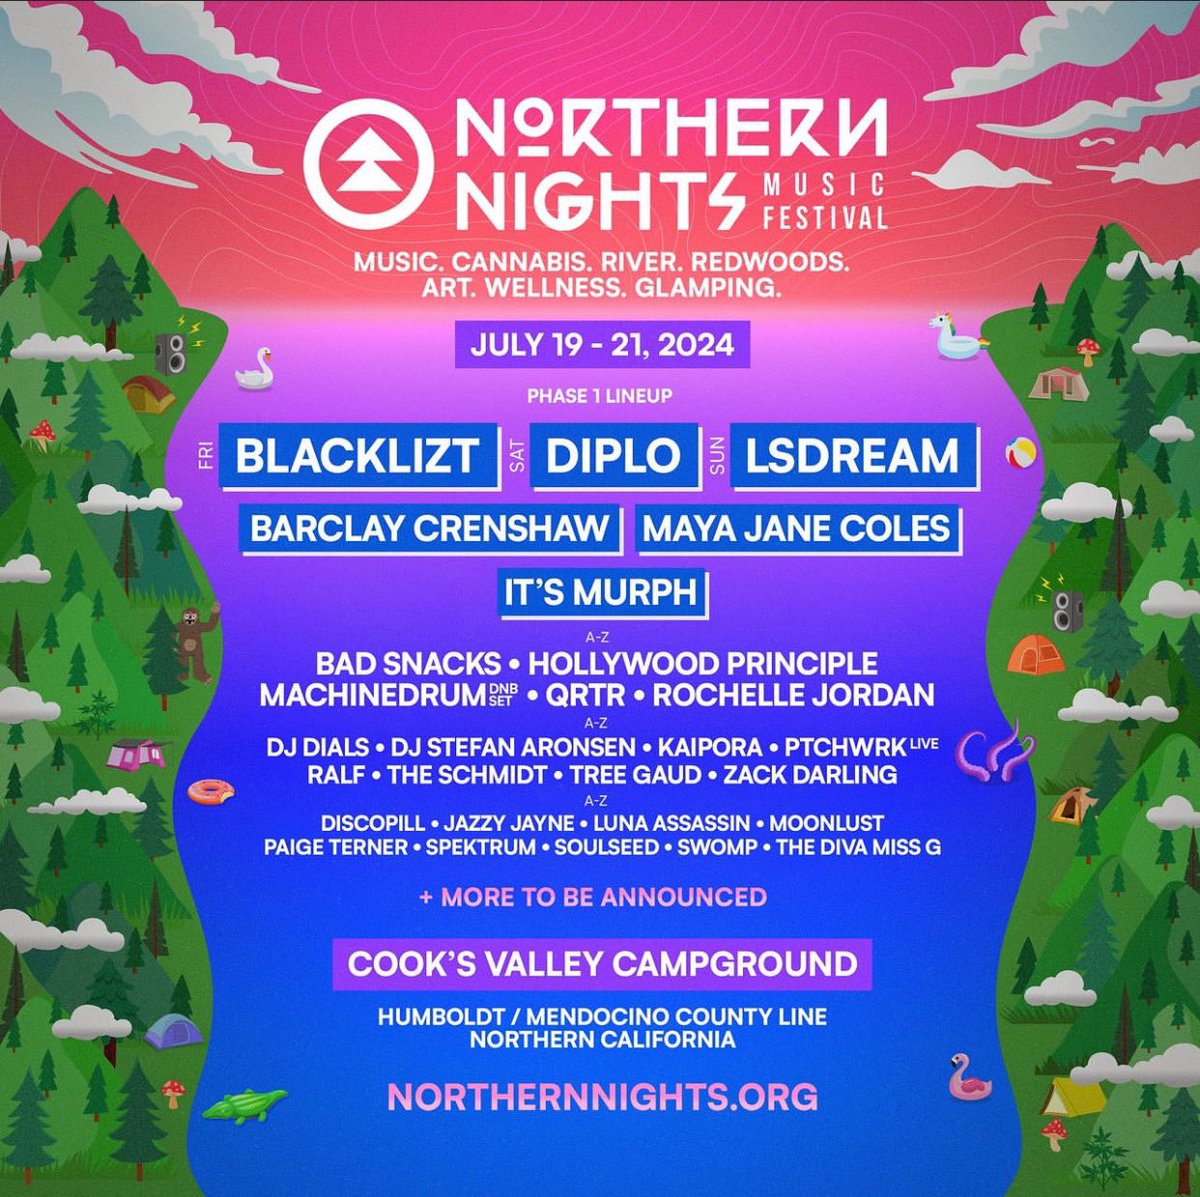 Your phase 1 @NNMFestival lineup!! 🥳 use our link to secure your passes today 👀

🎟️ linktr.ee/BastetPromotio… 🎟️

#BastetPromotions #NorthernNights #NorthernNights2024 #NNMF #NNMF2024 #NorthernNightsMusicFestival #NorthernNightsMusicFestival2024 #NNMFestival